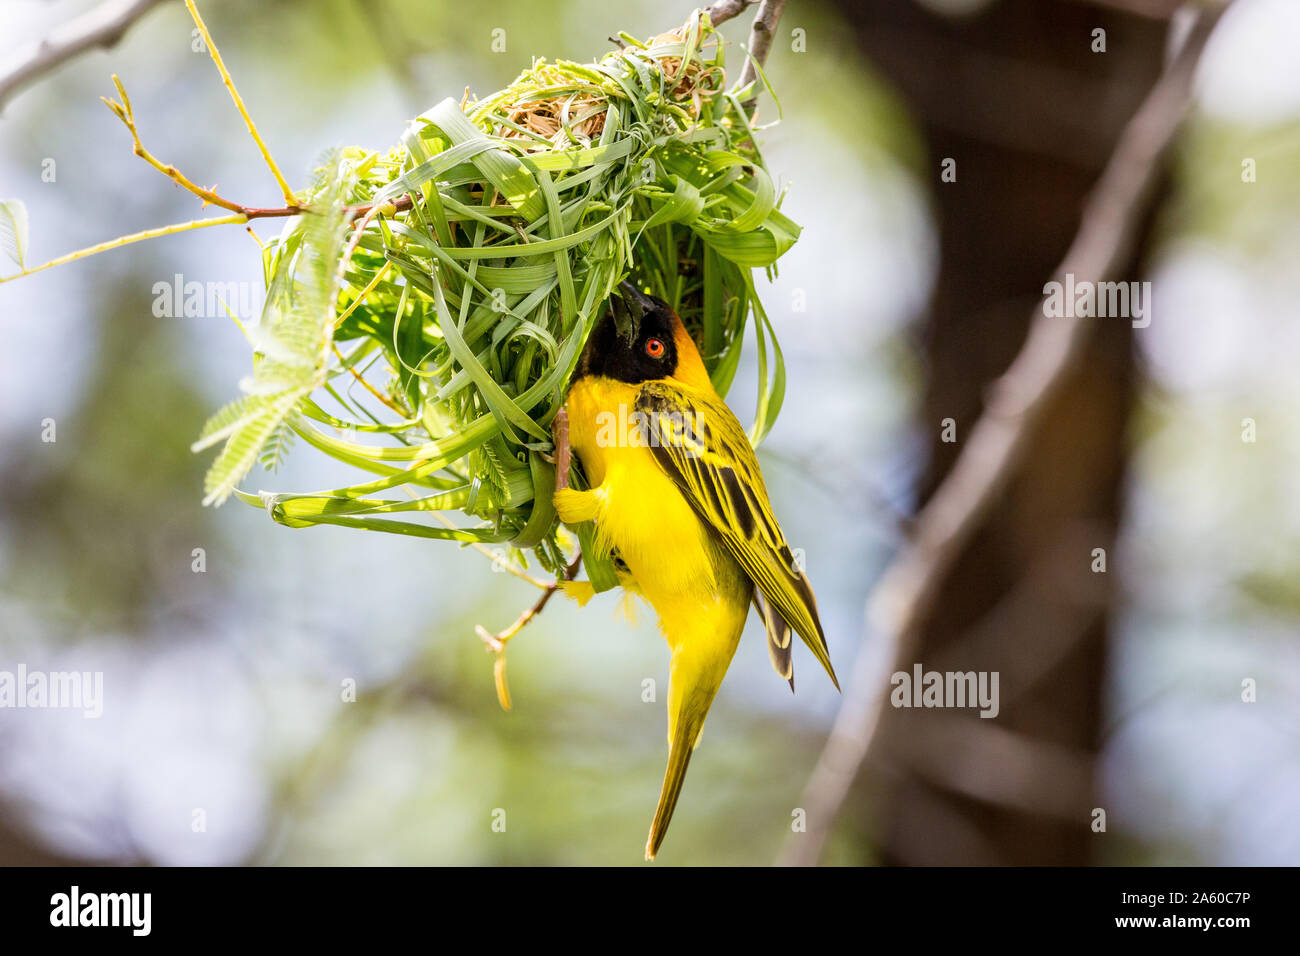 Yellow masked weaver bird building a nest, Namibia, Africa Stock Photo